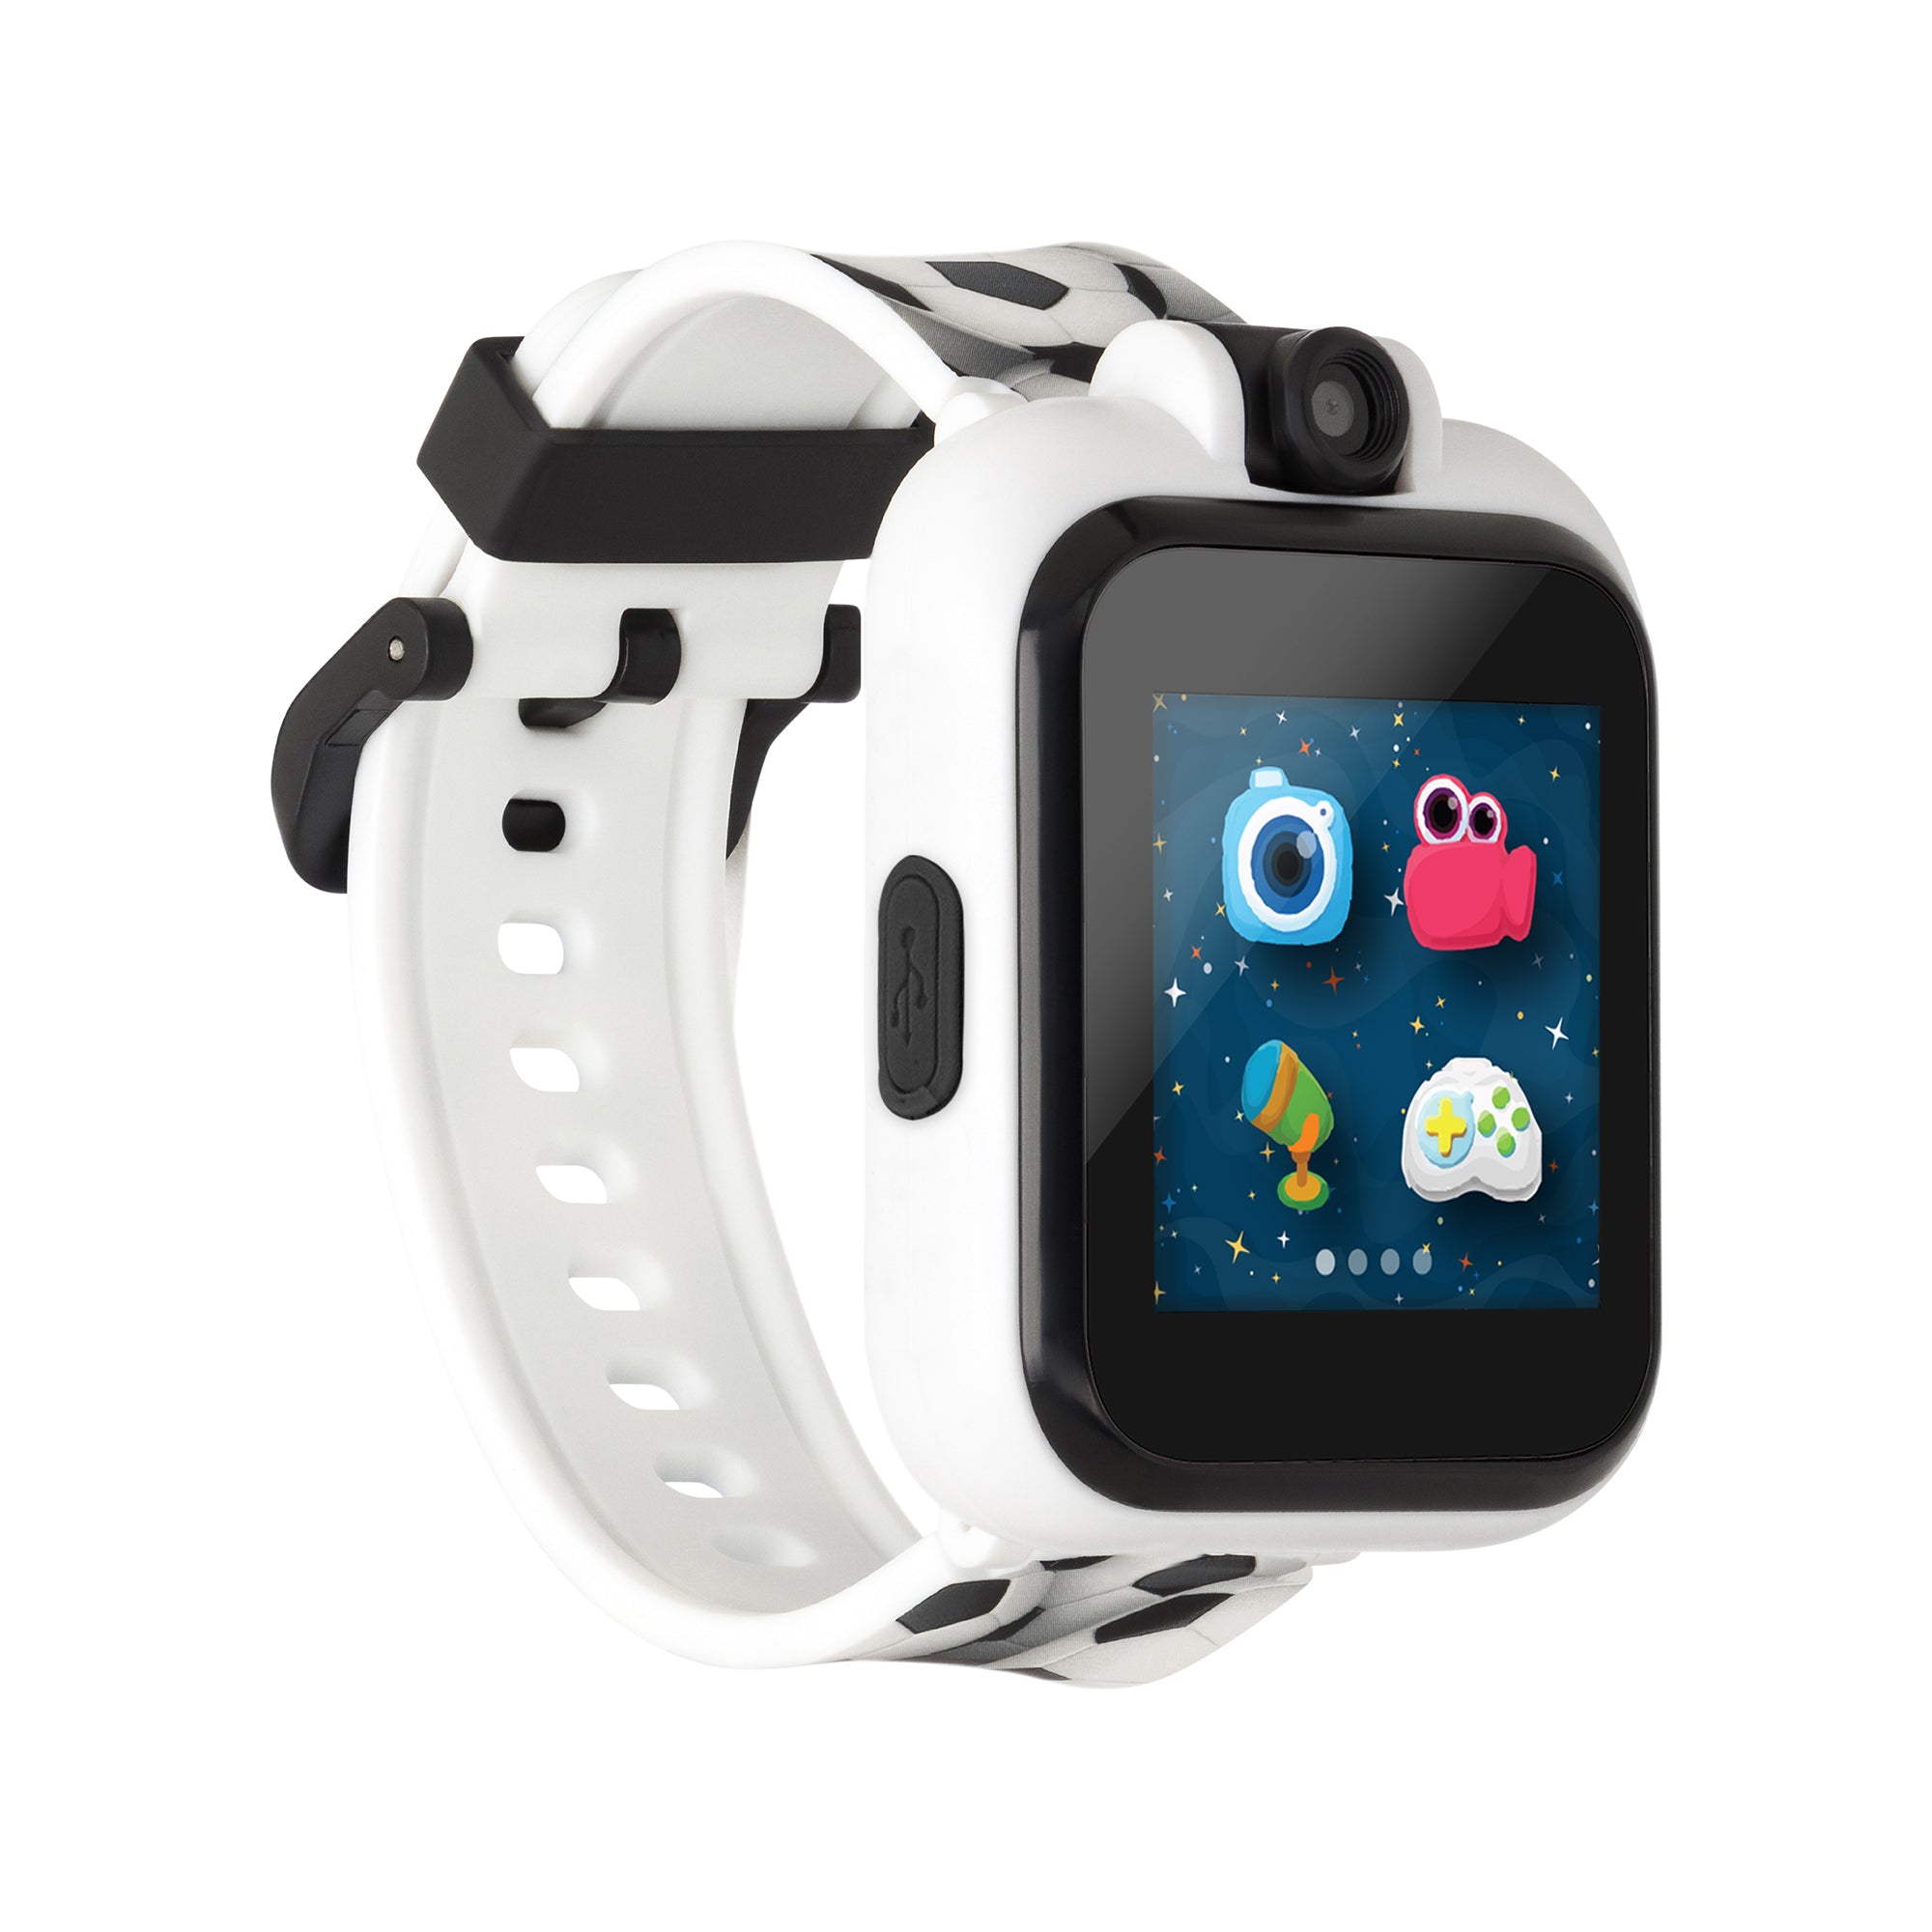 PlayZoom Smartwatch for Kids: Soccer Print affordable smart watch